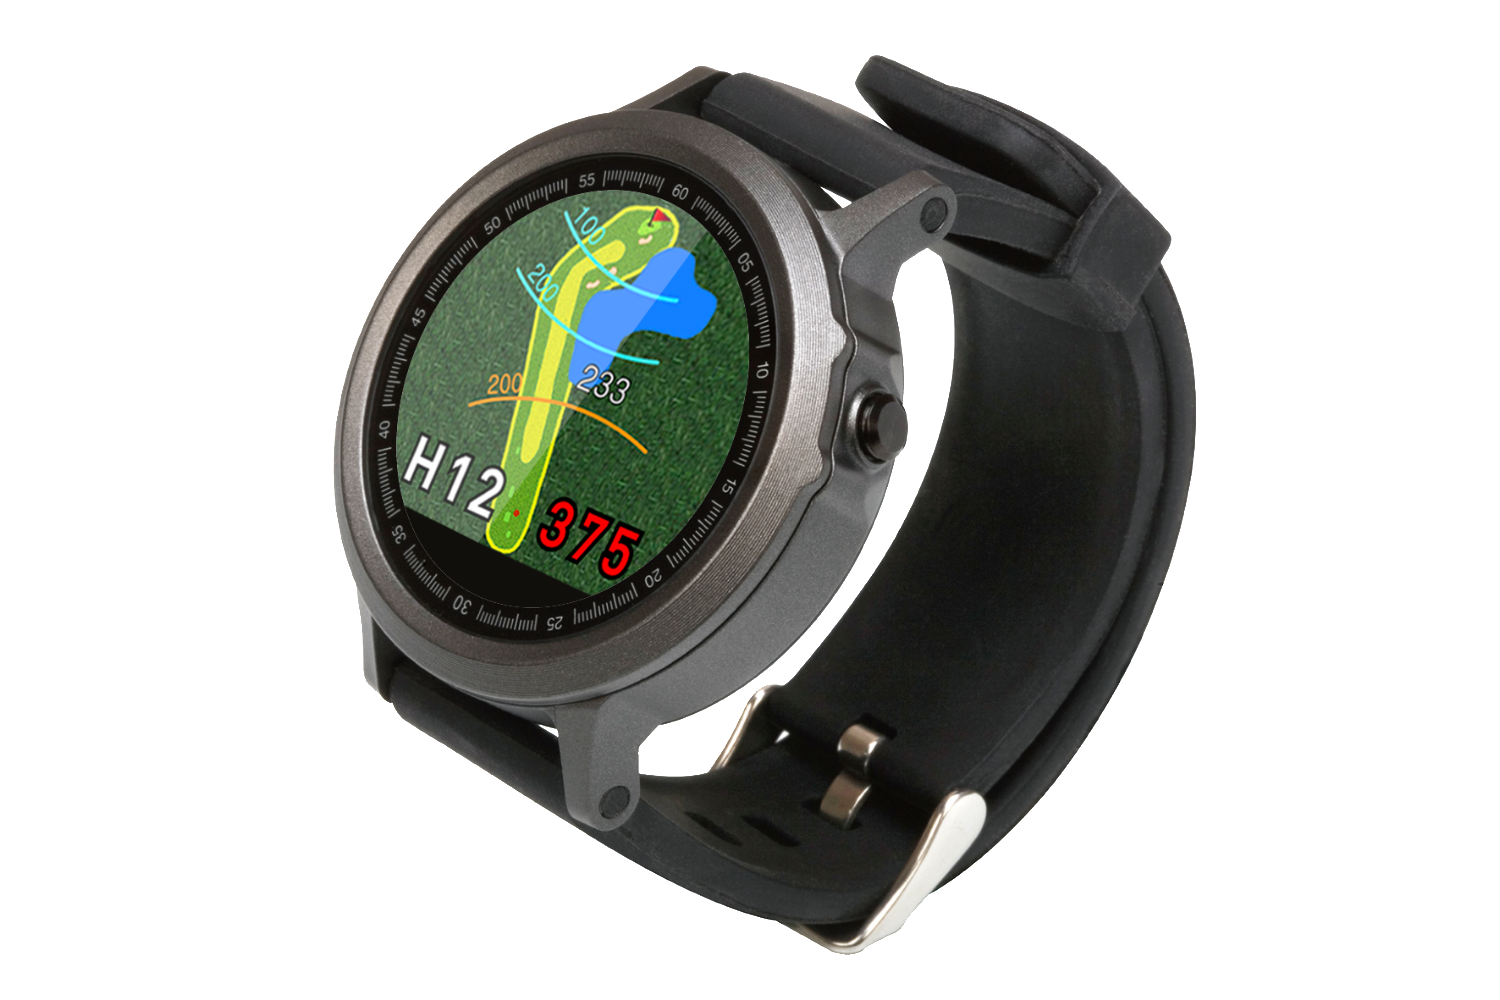 GolfBuddy introduce two new GPS watches for 2017